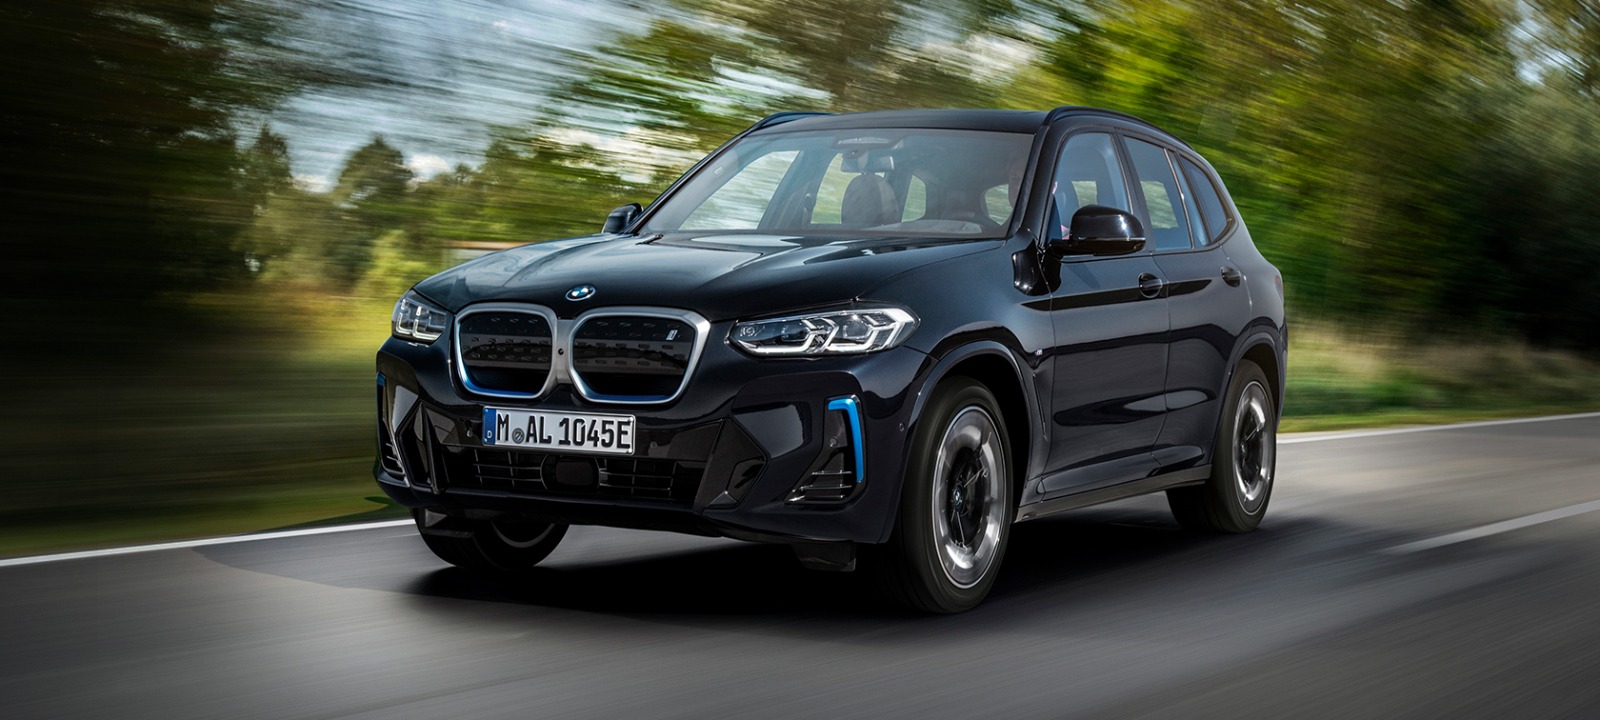 BMW iX3: German automotive giant launches, its first luxurious electric car for Nepal